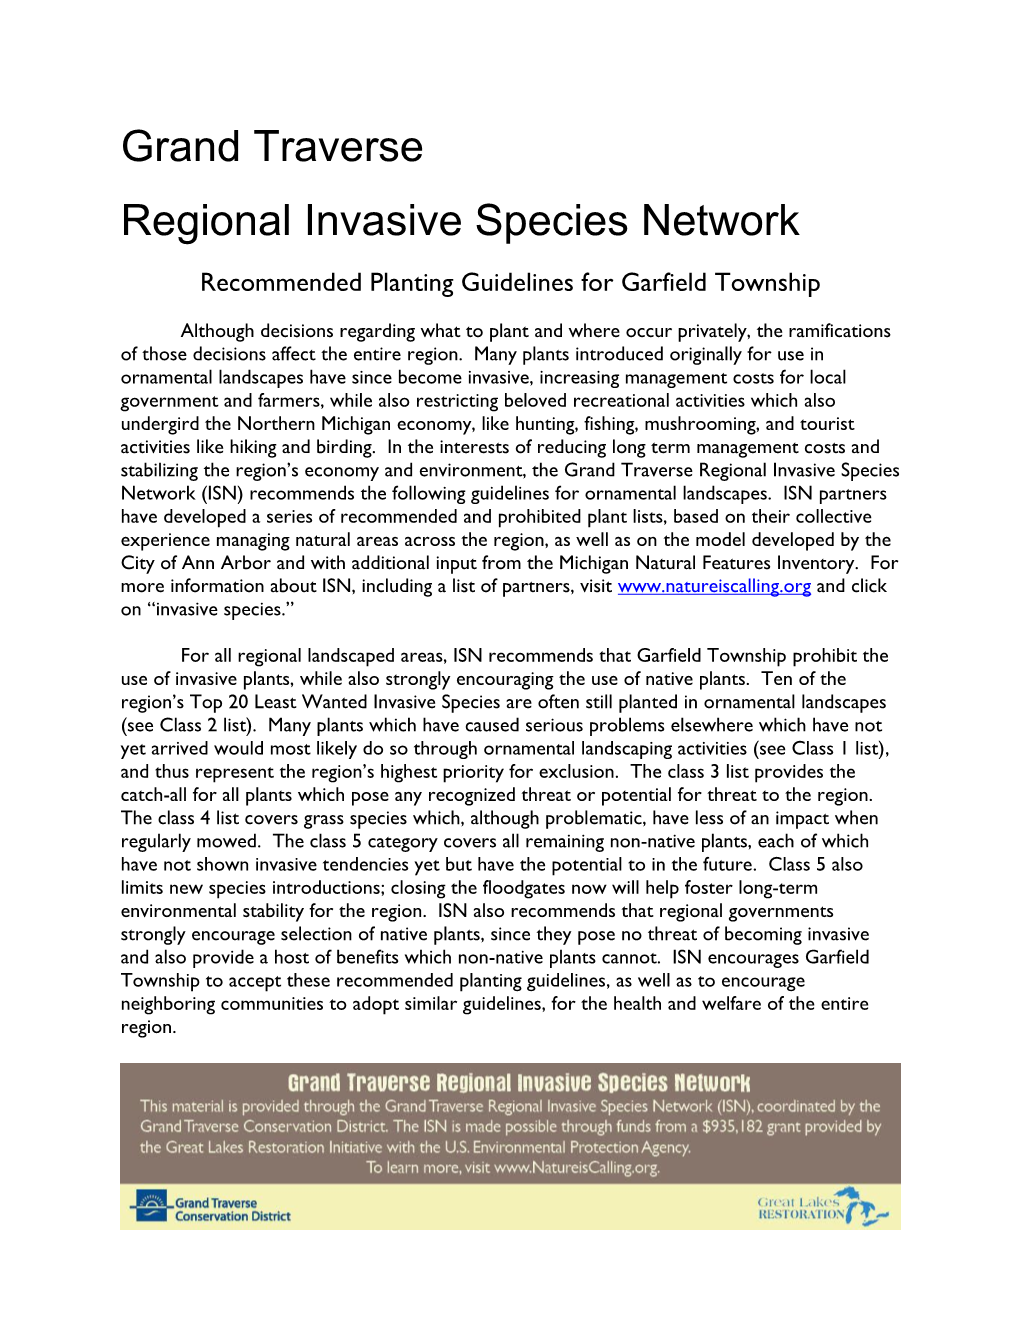 Grand Traverse Regional Invasive Species Network Recommended Planting Guidelines for Garfield Township